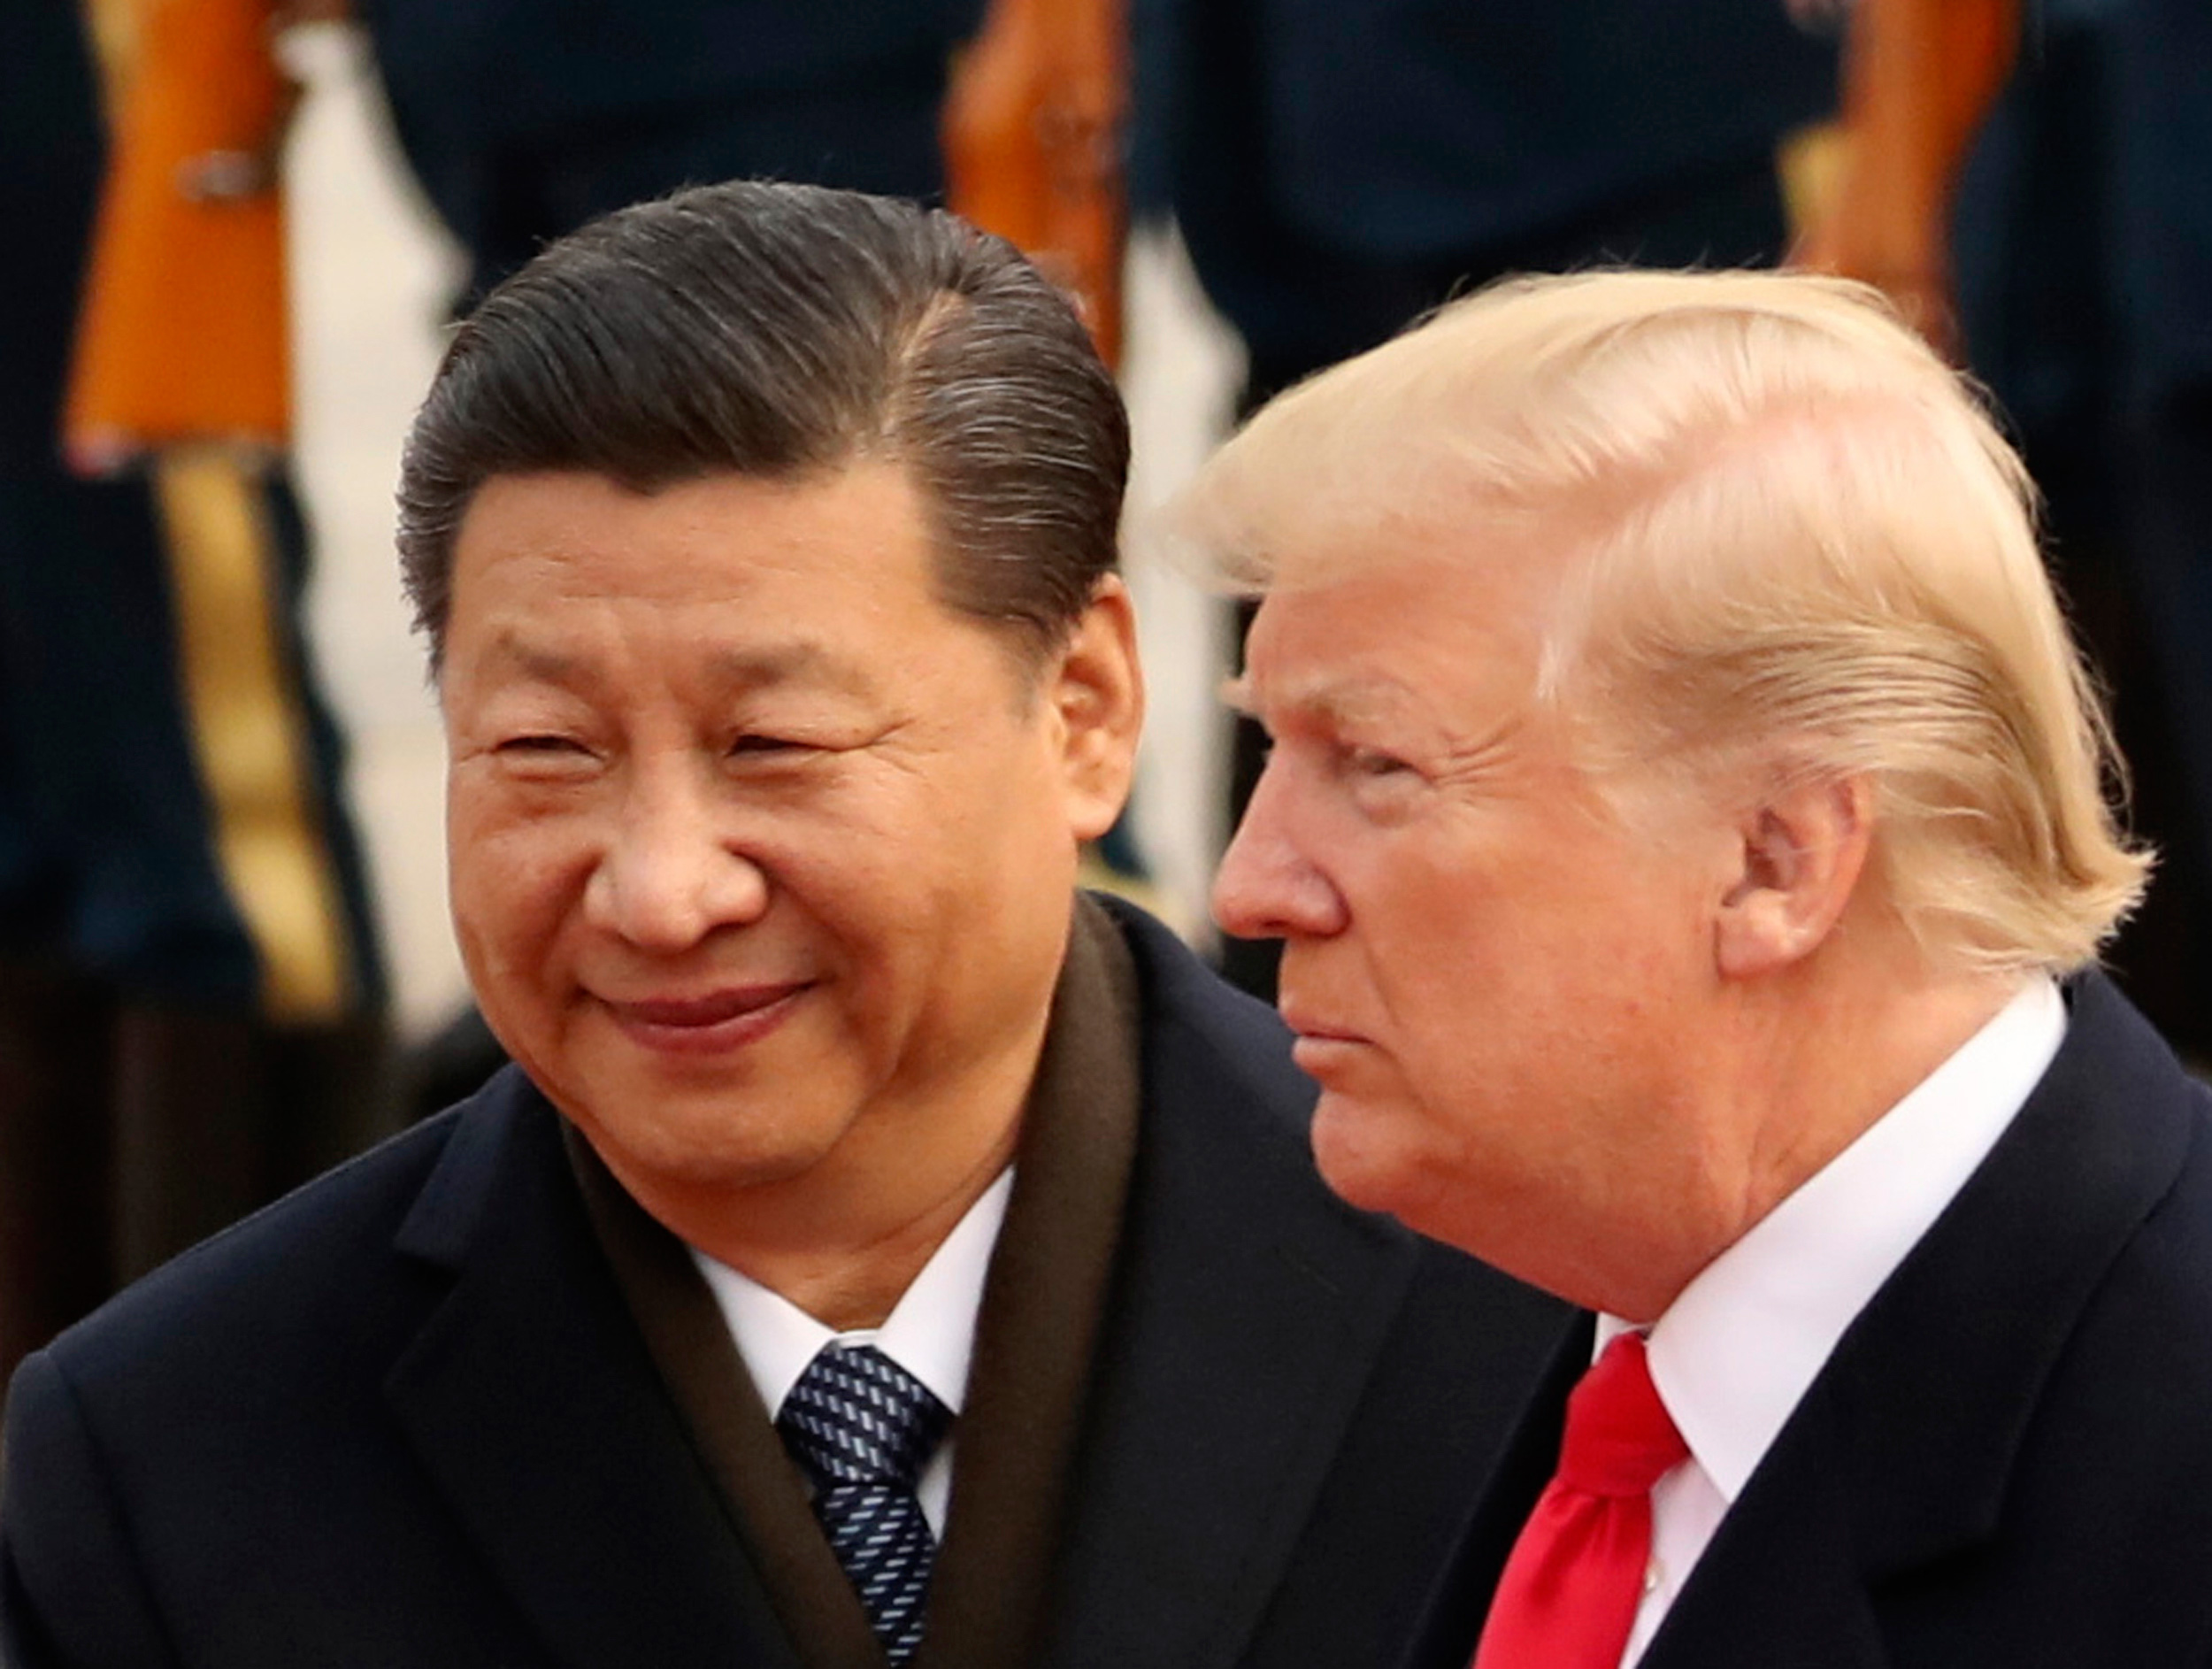 In this November 9, 2017, file picture, US President Donald Trump and Chinese President Xi Jinping participate in a welcome ceremony at the Great Hall of the People in Beijing, China